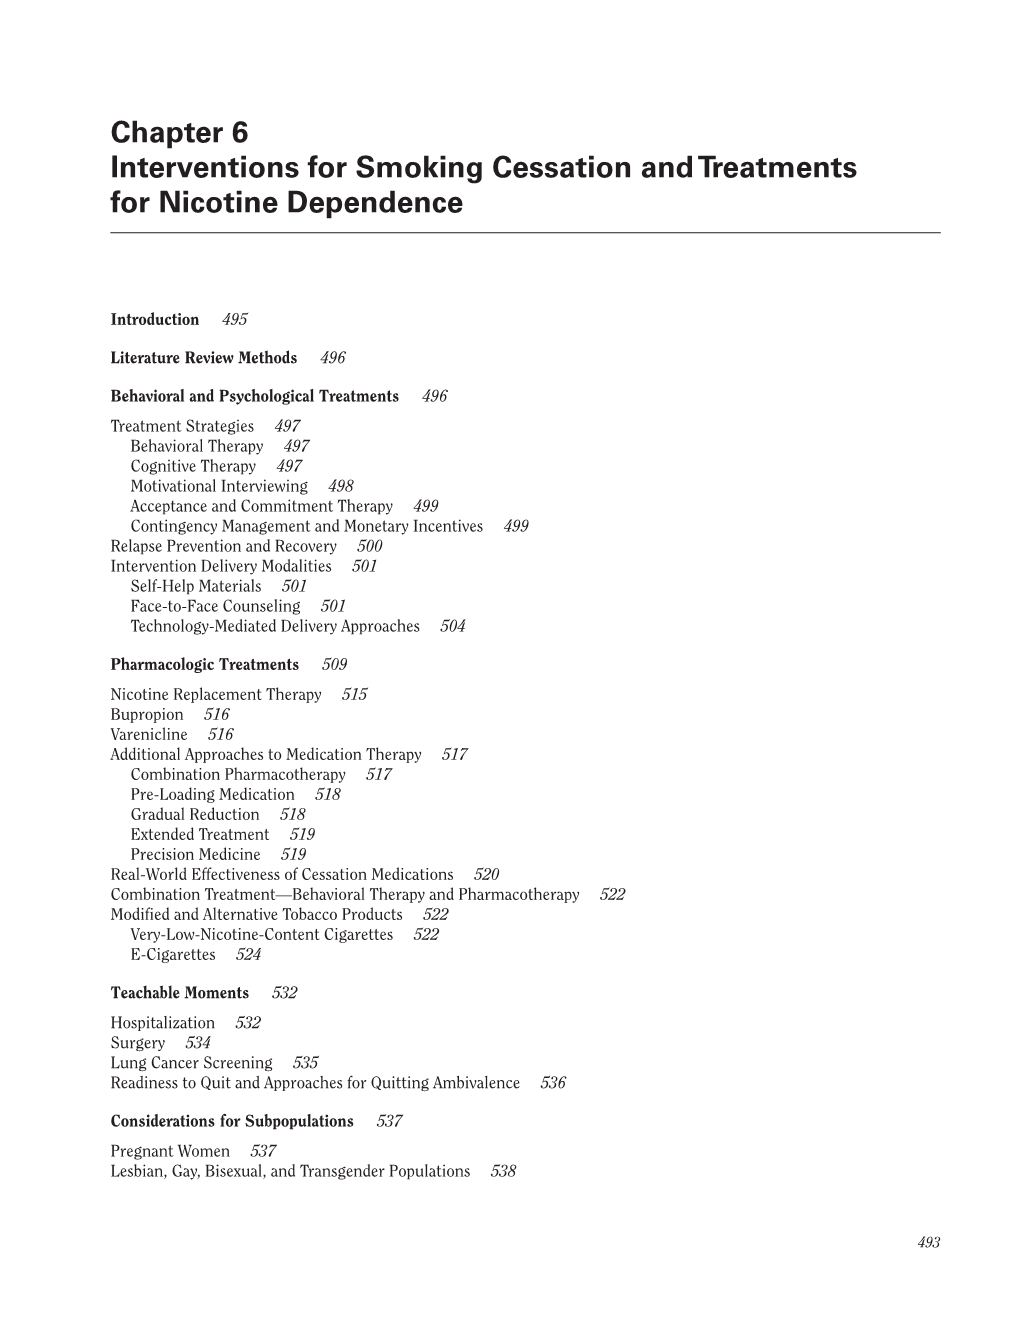 Smoking Cessation: a Report of the Surgeon General (Chapter 6)